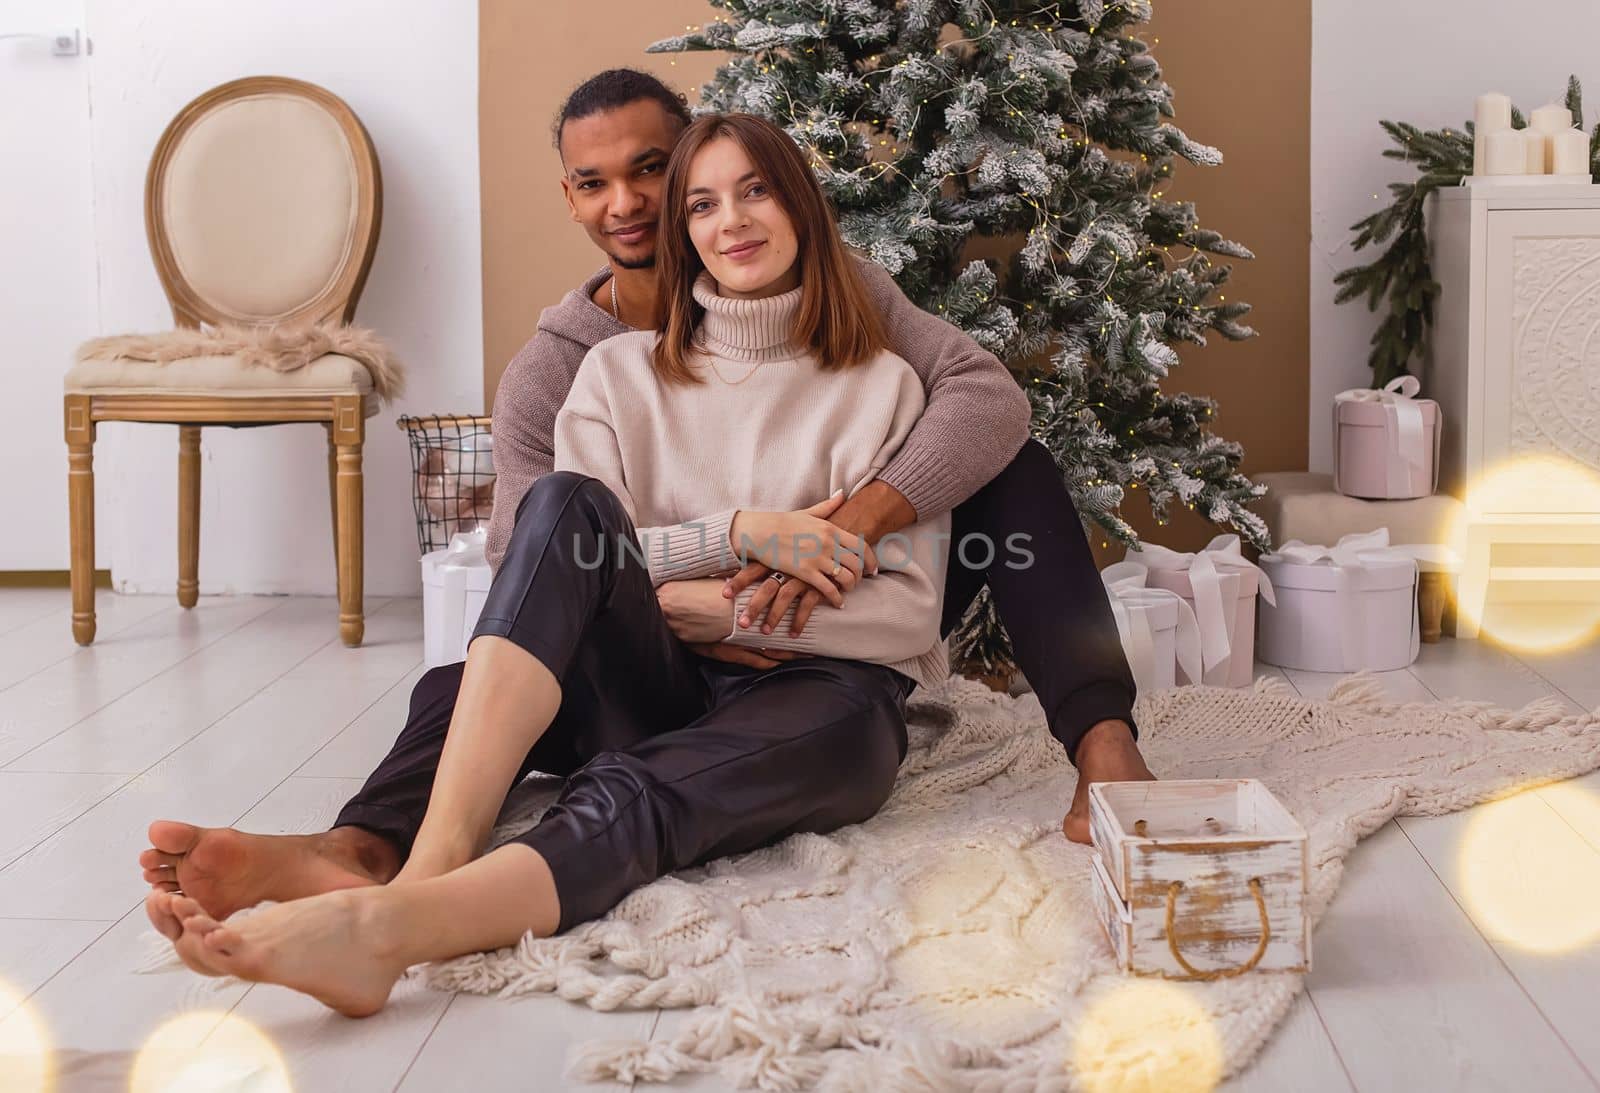 A happy stylish dark-skinned guy in a brown sweatshirt is sitting hugging his girlfriend, near the Christmas tree in the room.